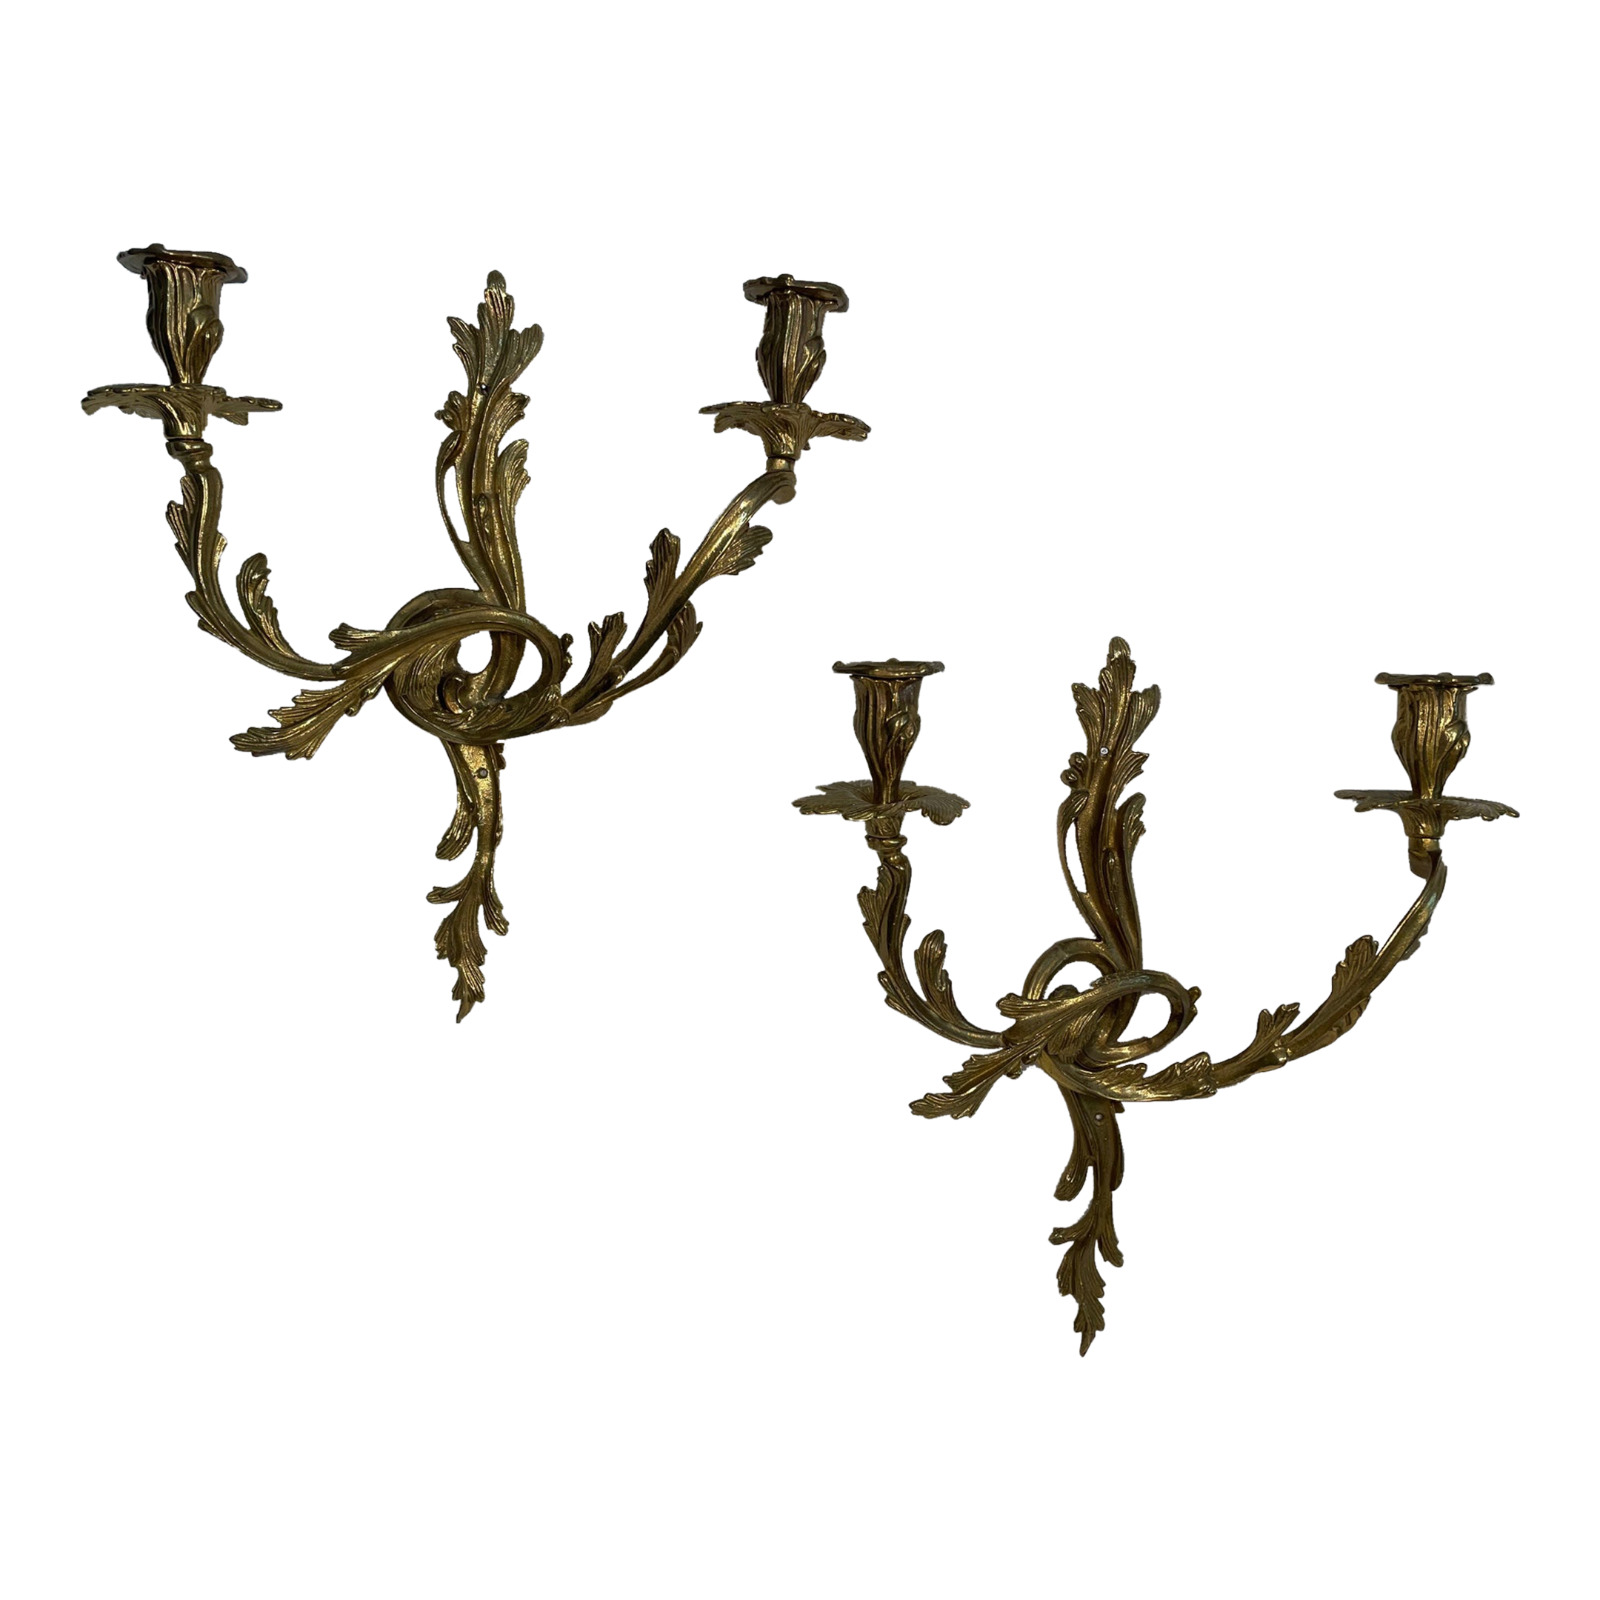 Large Early 20th Century French Rococo Style Brass Wall Candle Sconces - a Pair